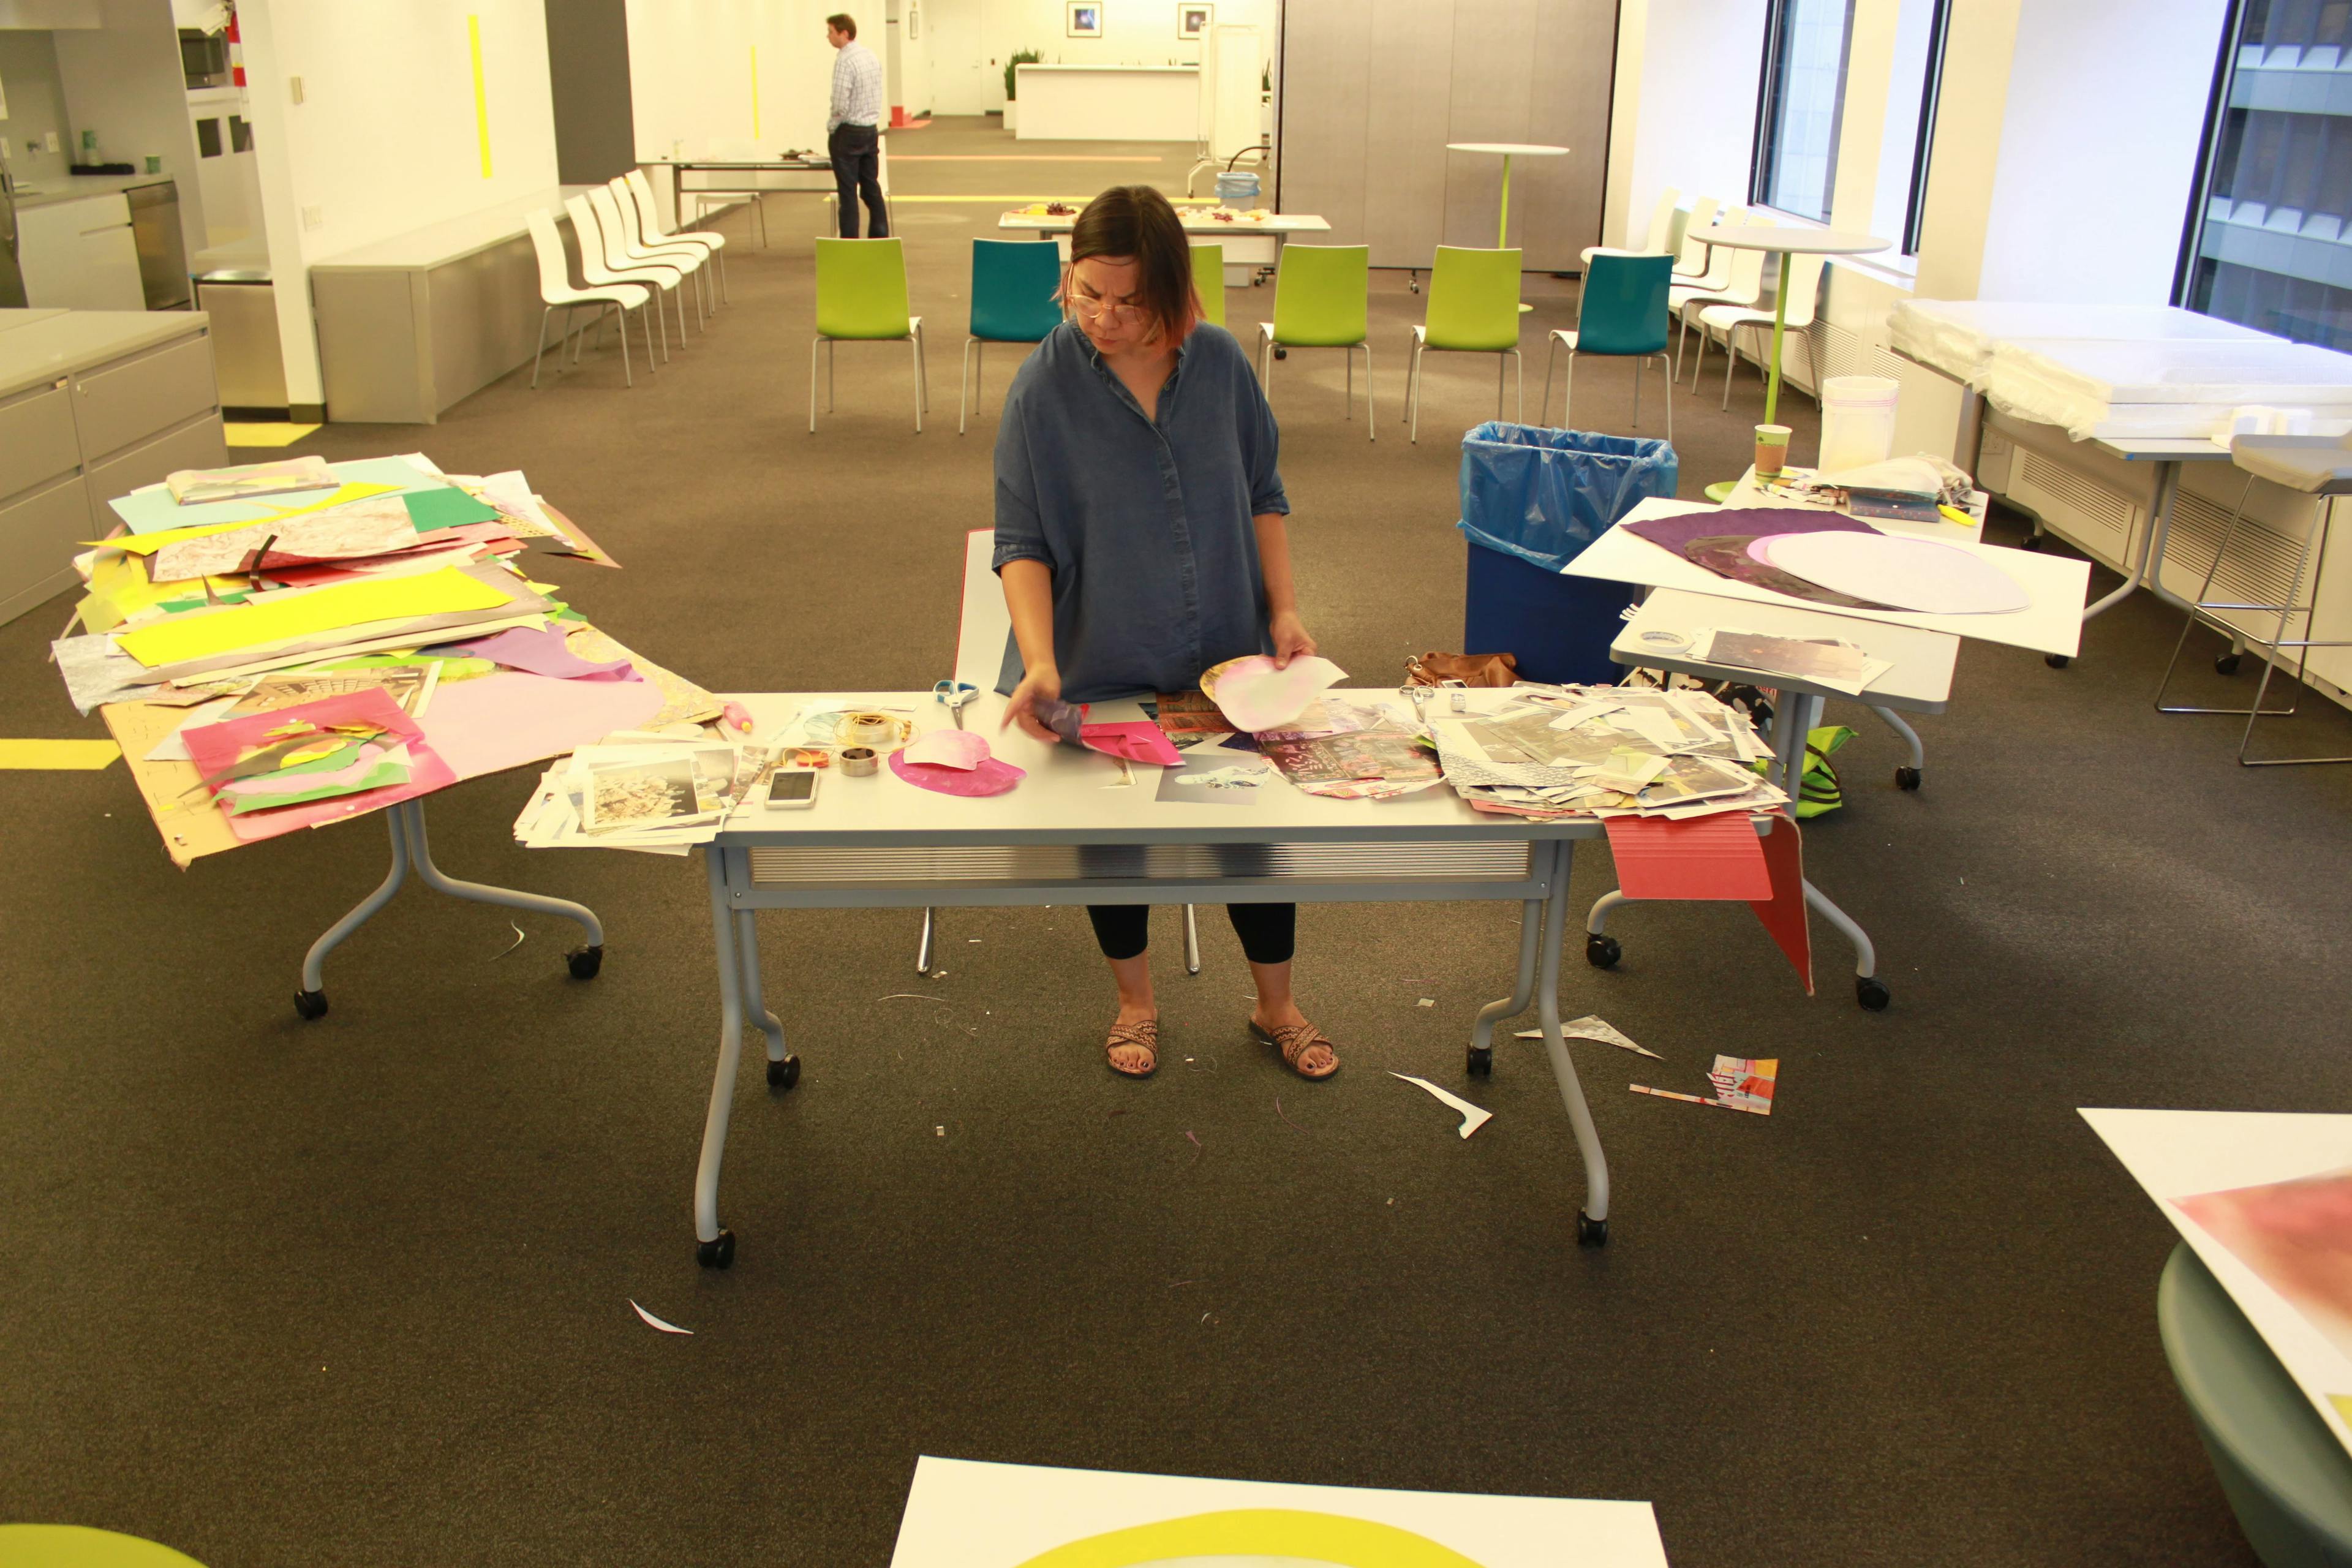 Artist Xochi Solis in an office building standing in front of three desks covered with scraps of paper and collage material.